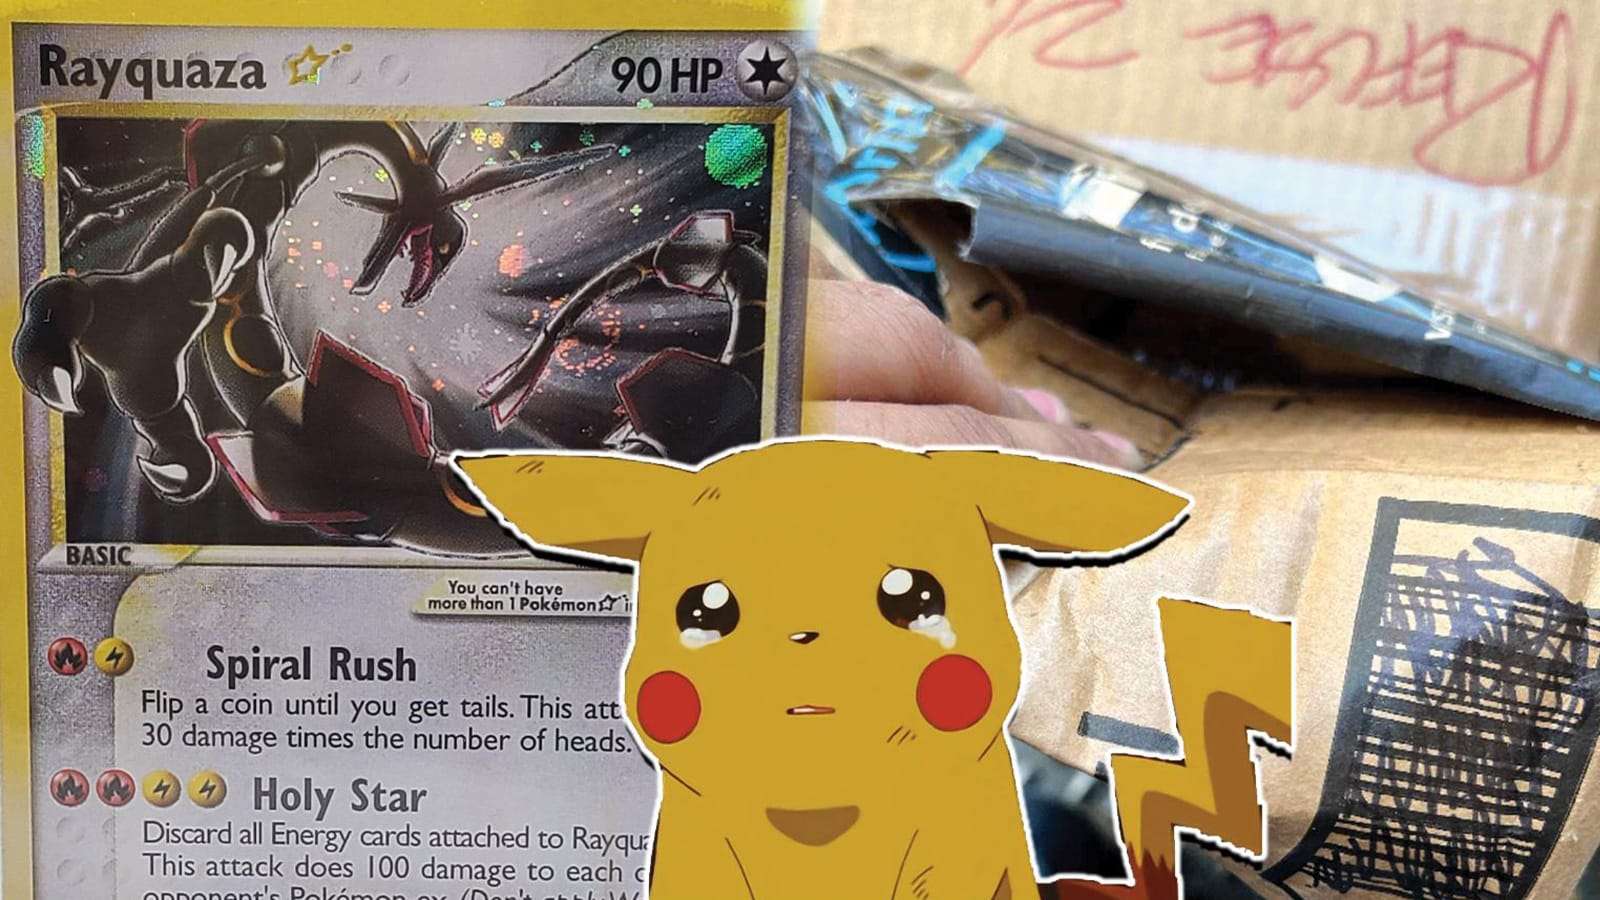 Pokemon Card Rayquaza Gold star next to damaged shipping package screenshot.